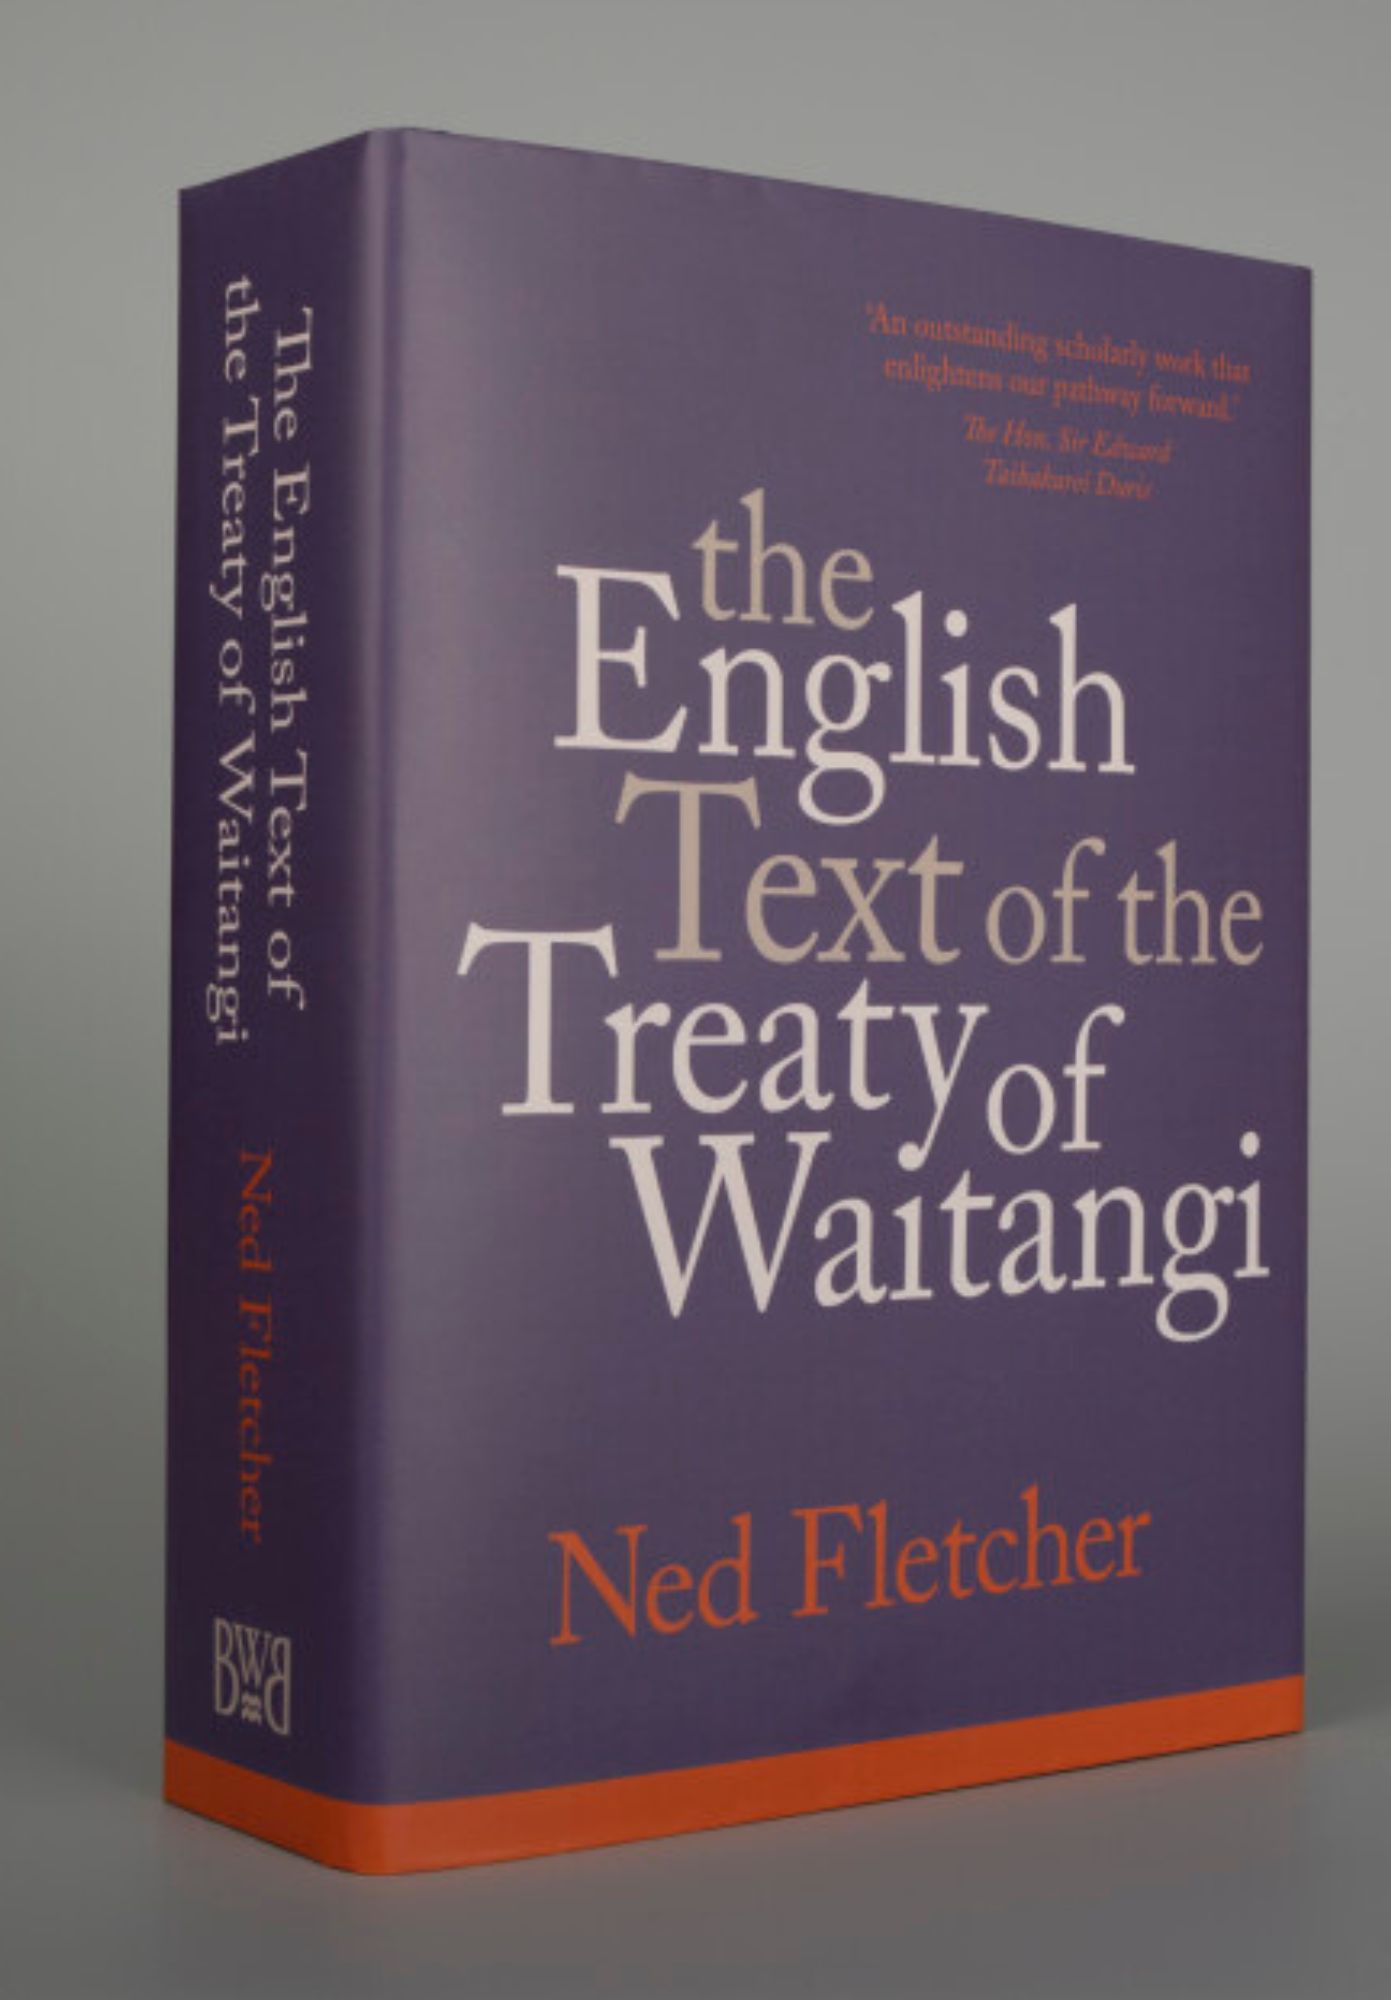 Book cover of the Ned Fletcher's book